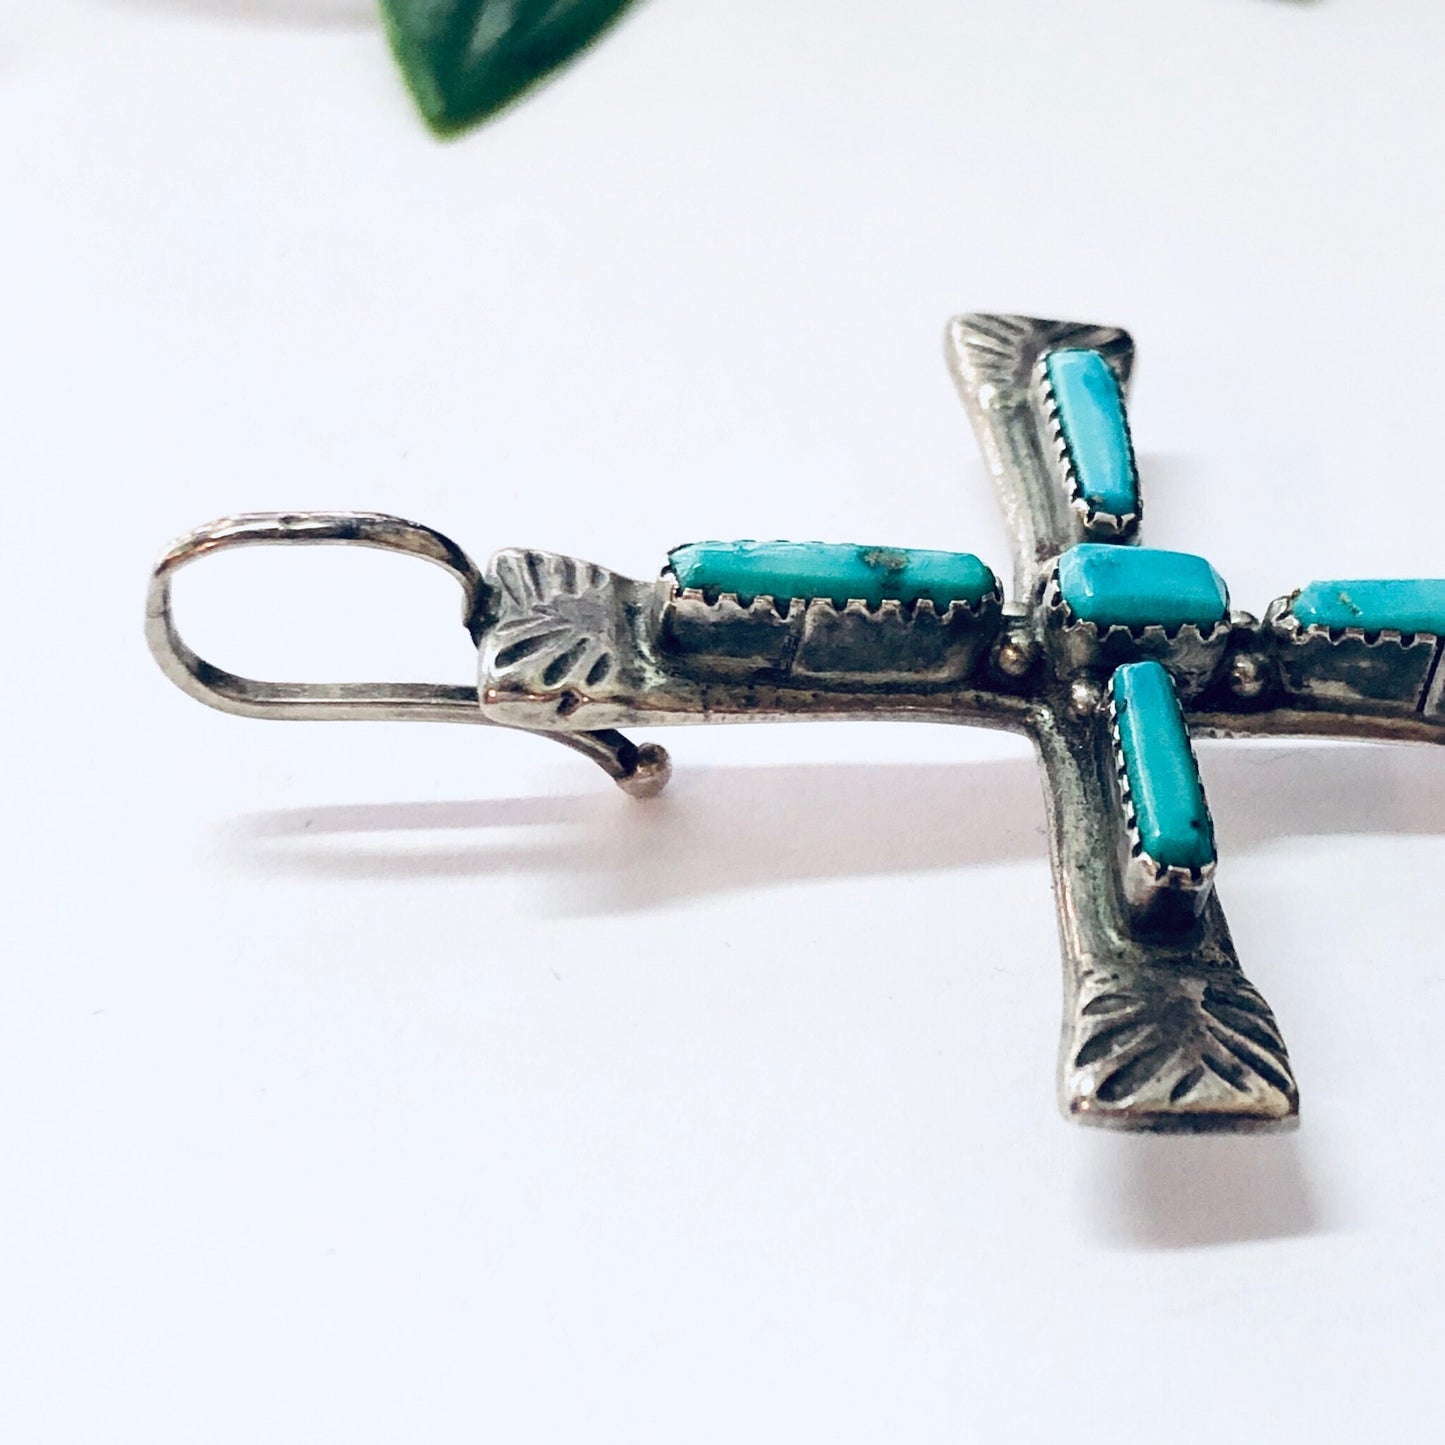 Vintage Zuni silver cross pendant with turquoise inlay, Native American jewelry from the 1970s.